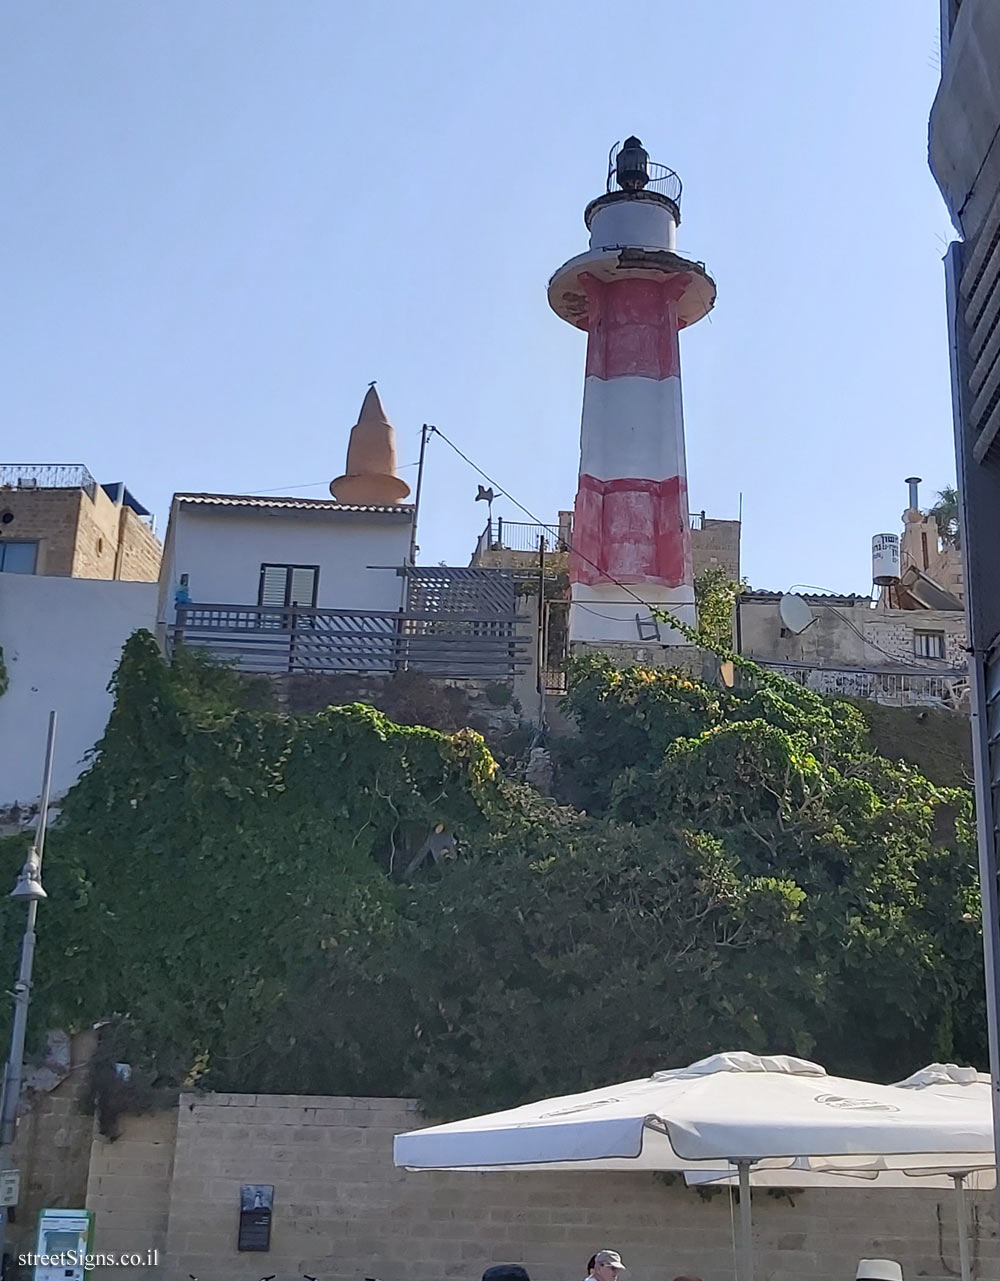 Old Jaffa - The Lighthouse